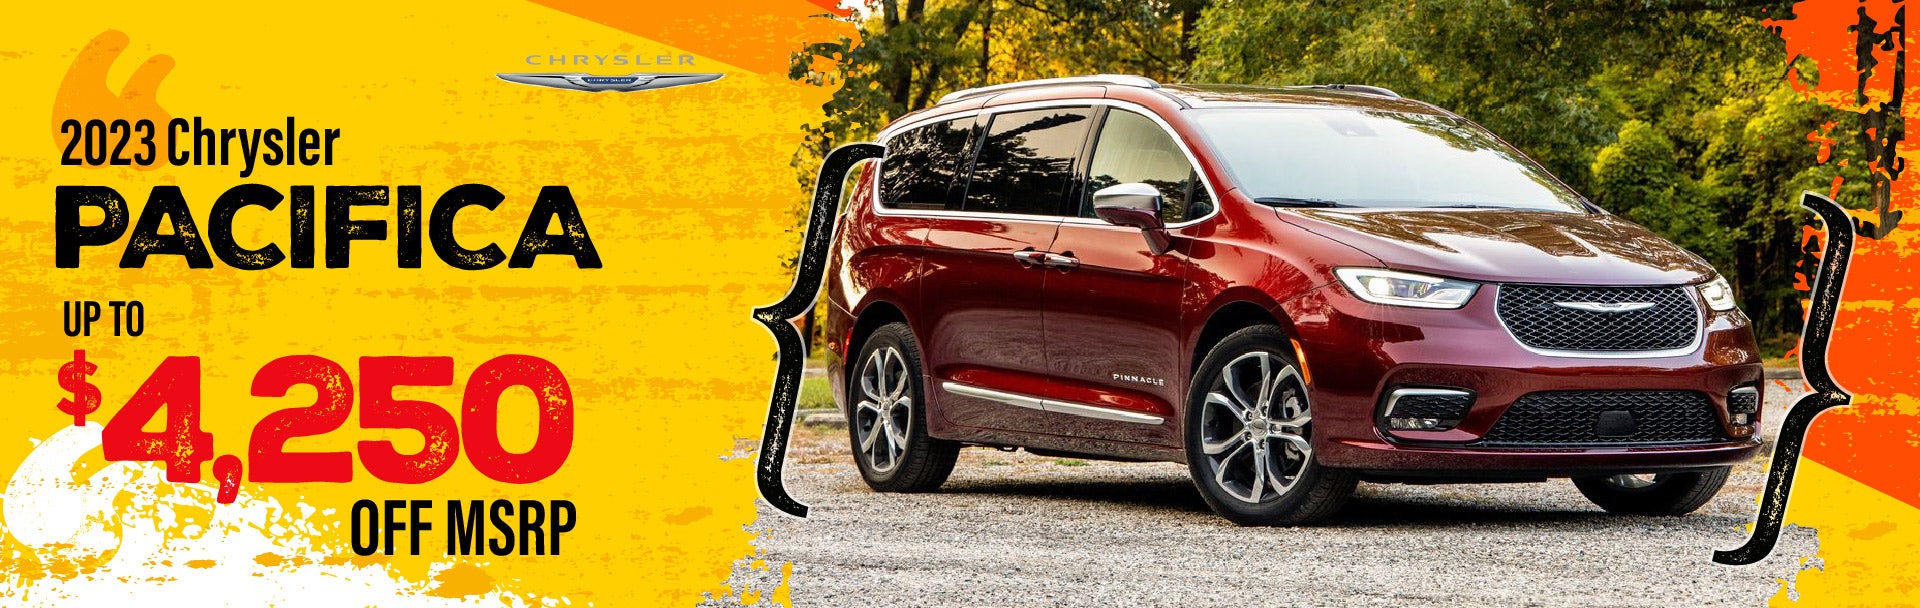 NEW Chrysler Pacifica - save up to $4250